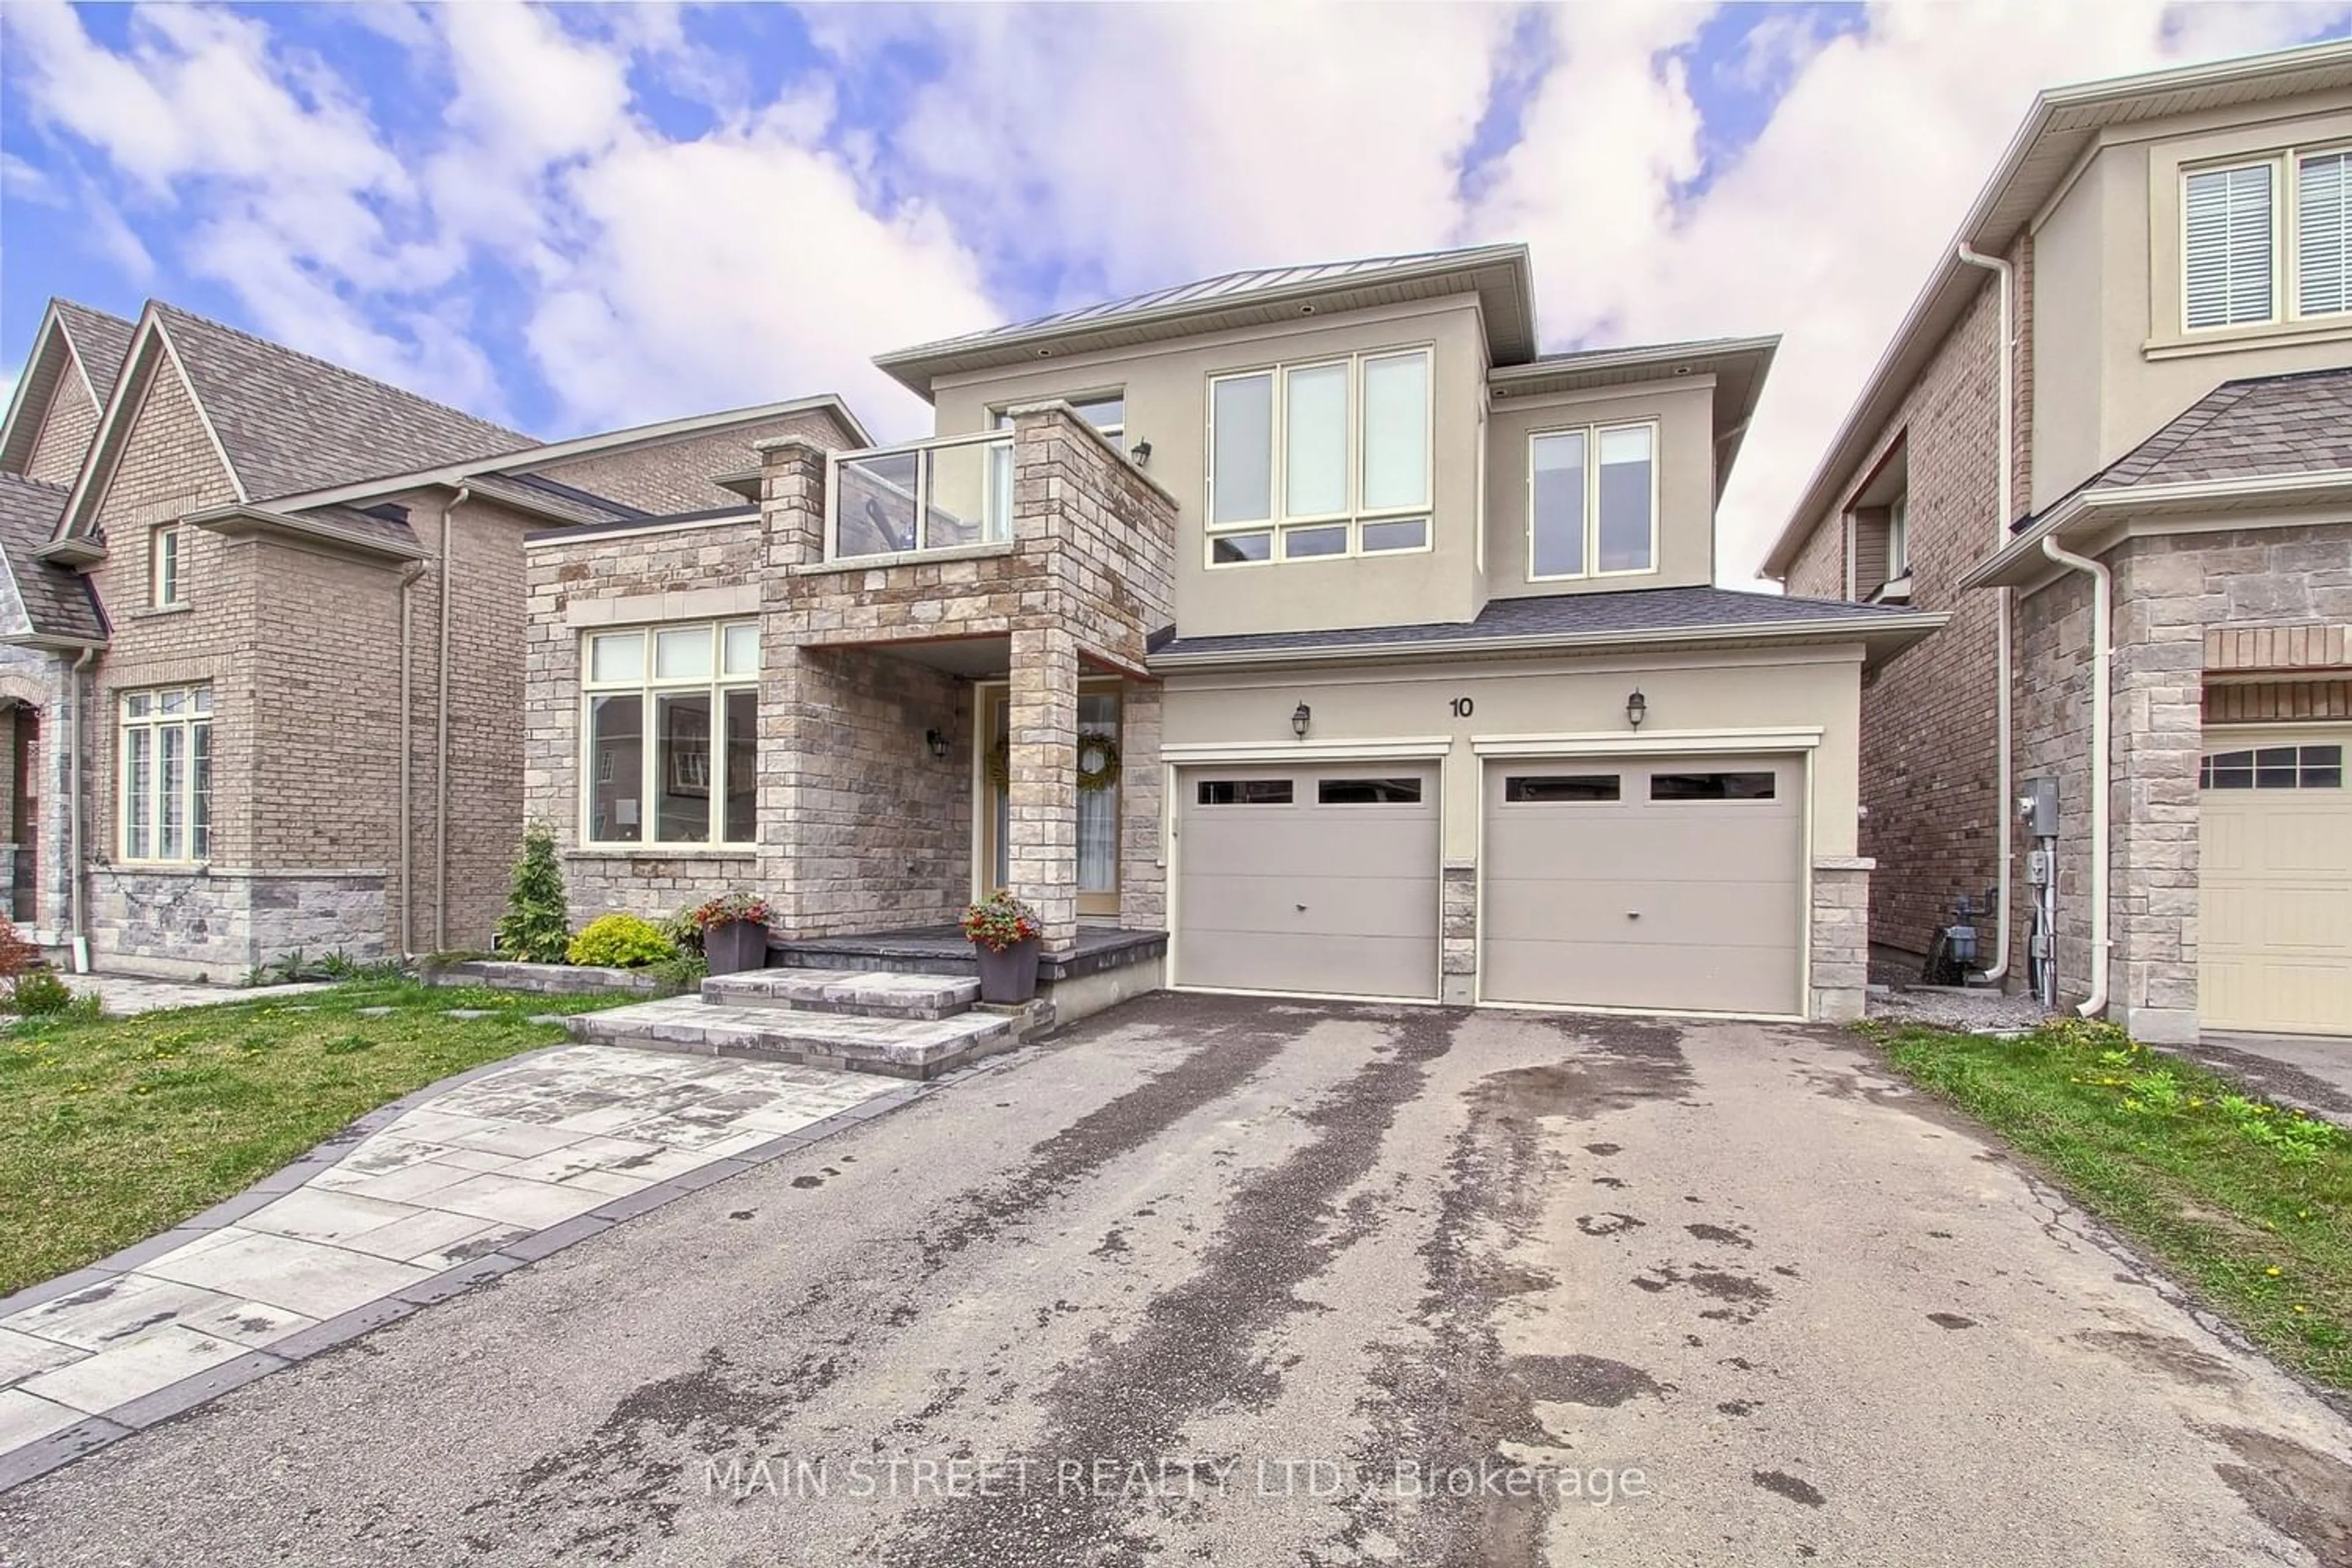 Home with brick exterior material for 10 Mondial Cres, East Gwillimbury Ontario L9N 0S1